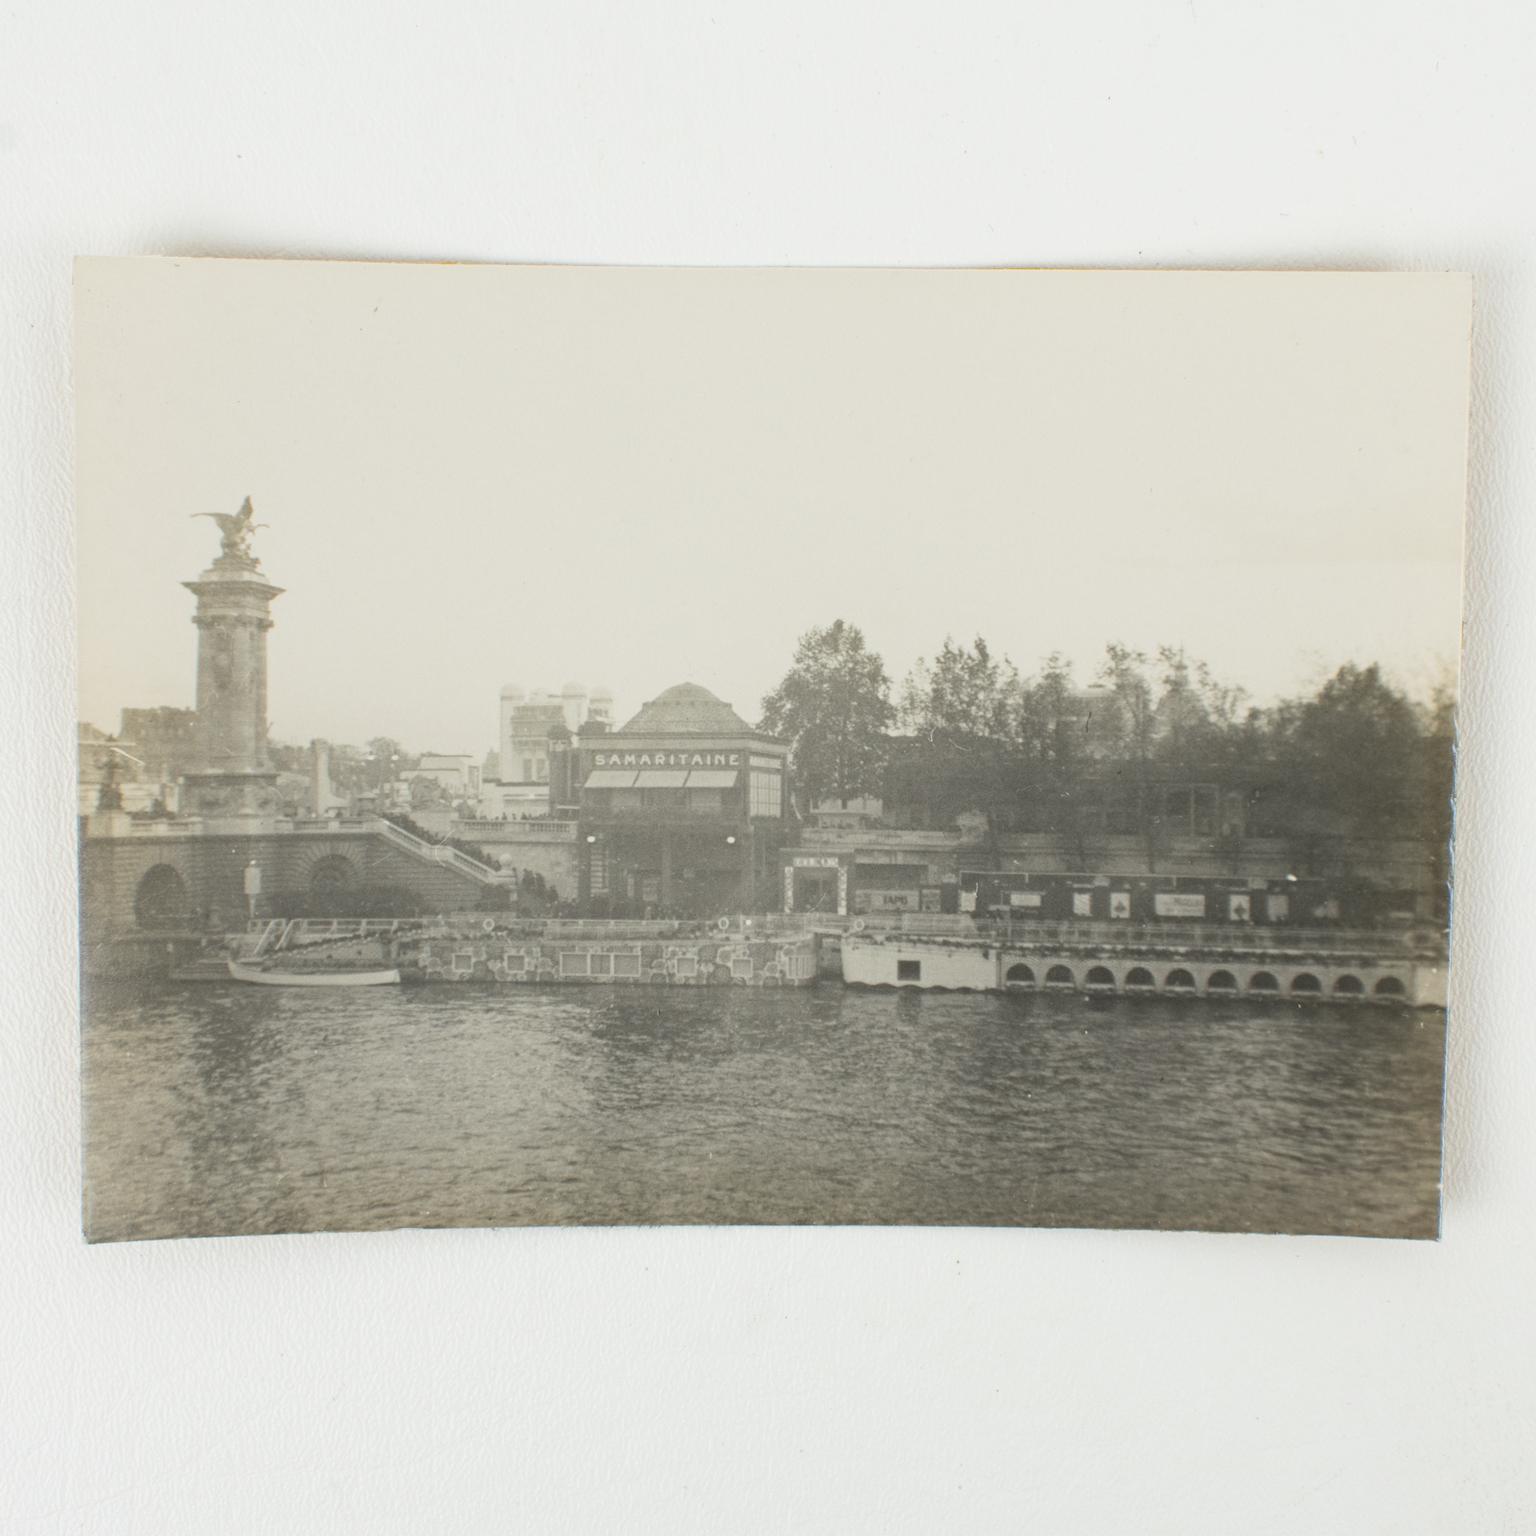 A unique original silver gelatin black and white photography.
The International Decorative Arts Exhibition in Paris, October 1925. Along with the Seine River, The Department Store 